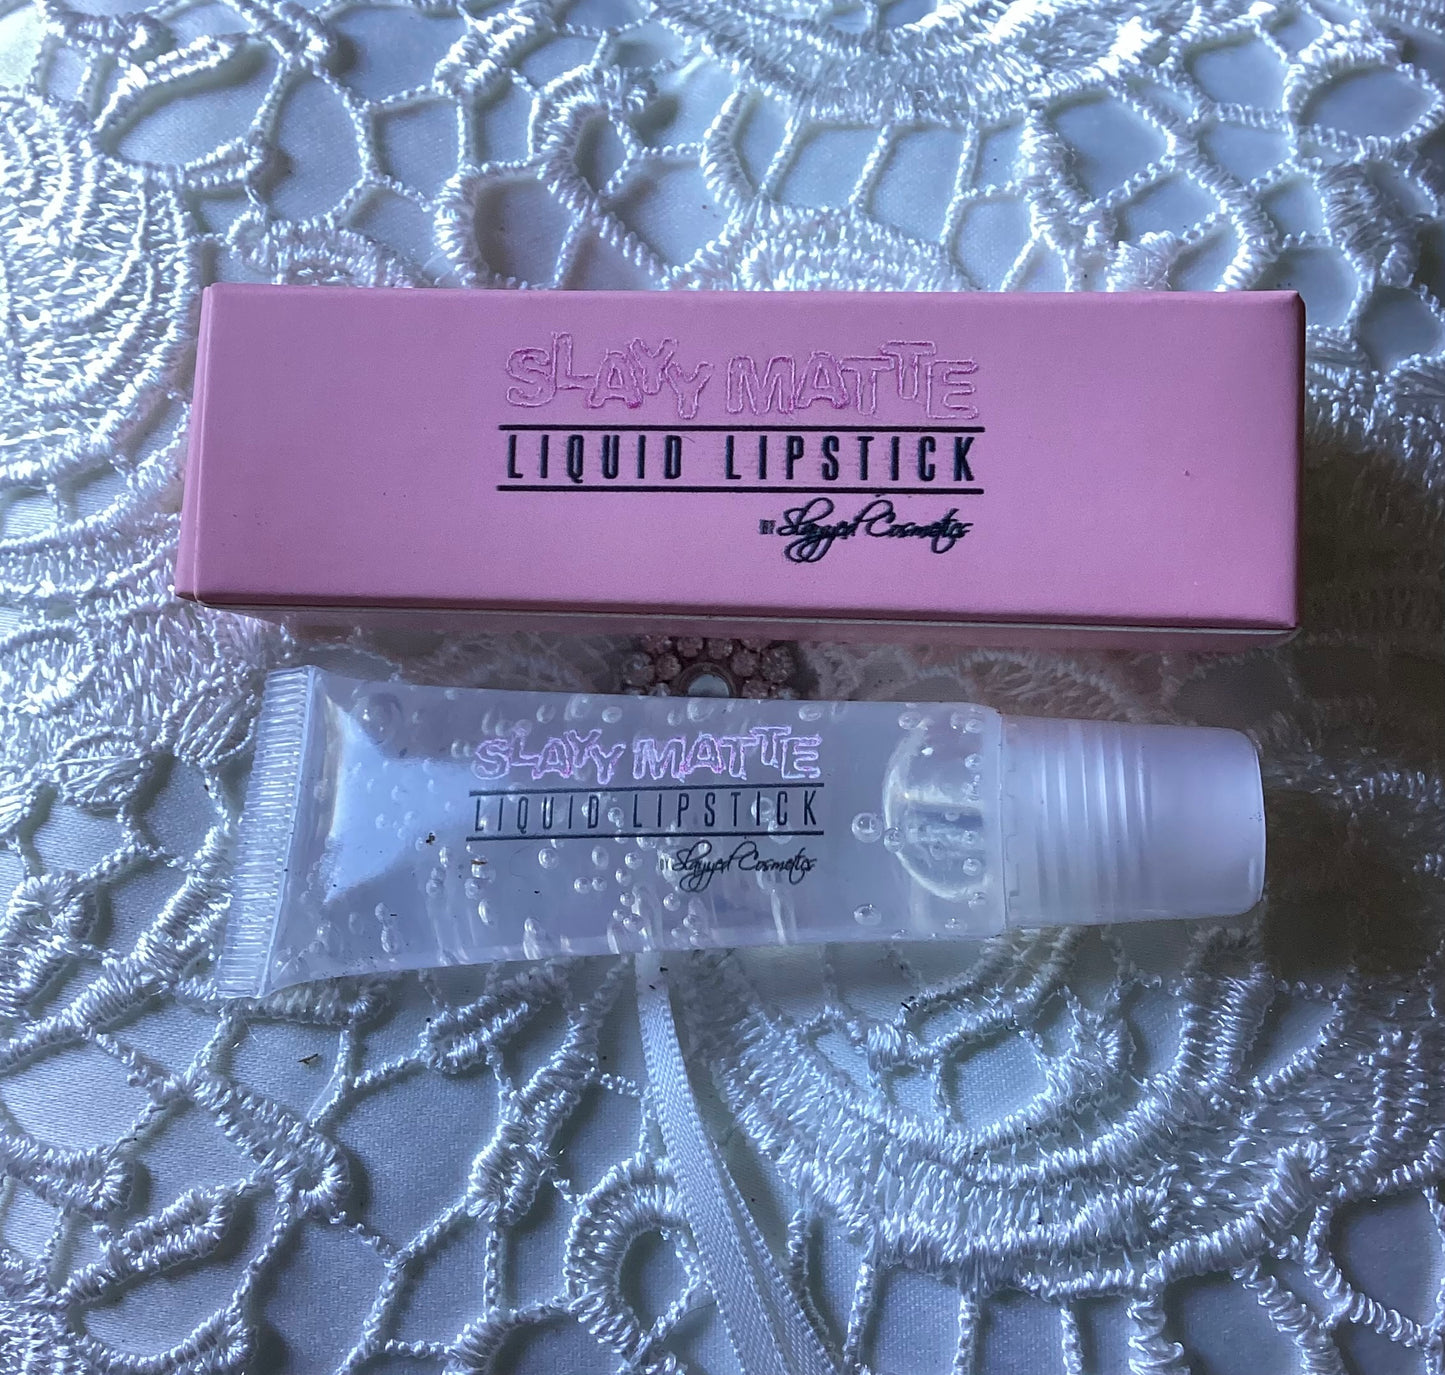 Lips and Lashes Mother’s Day Bundle